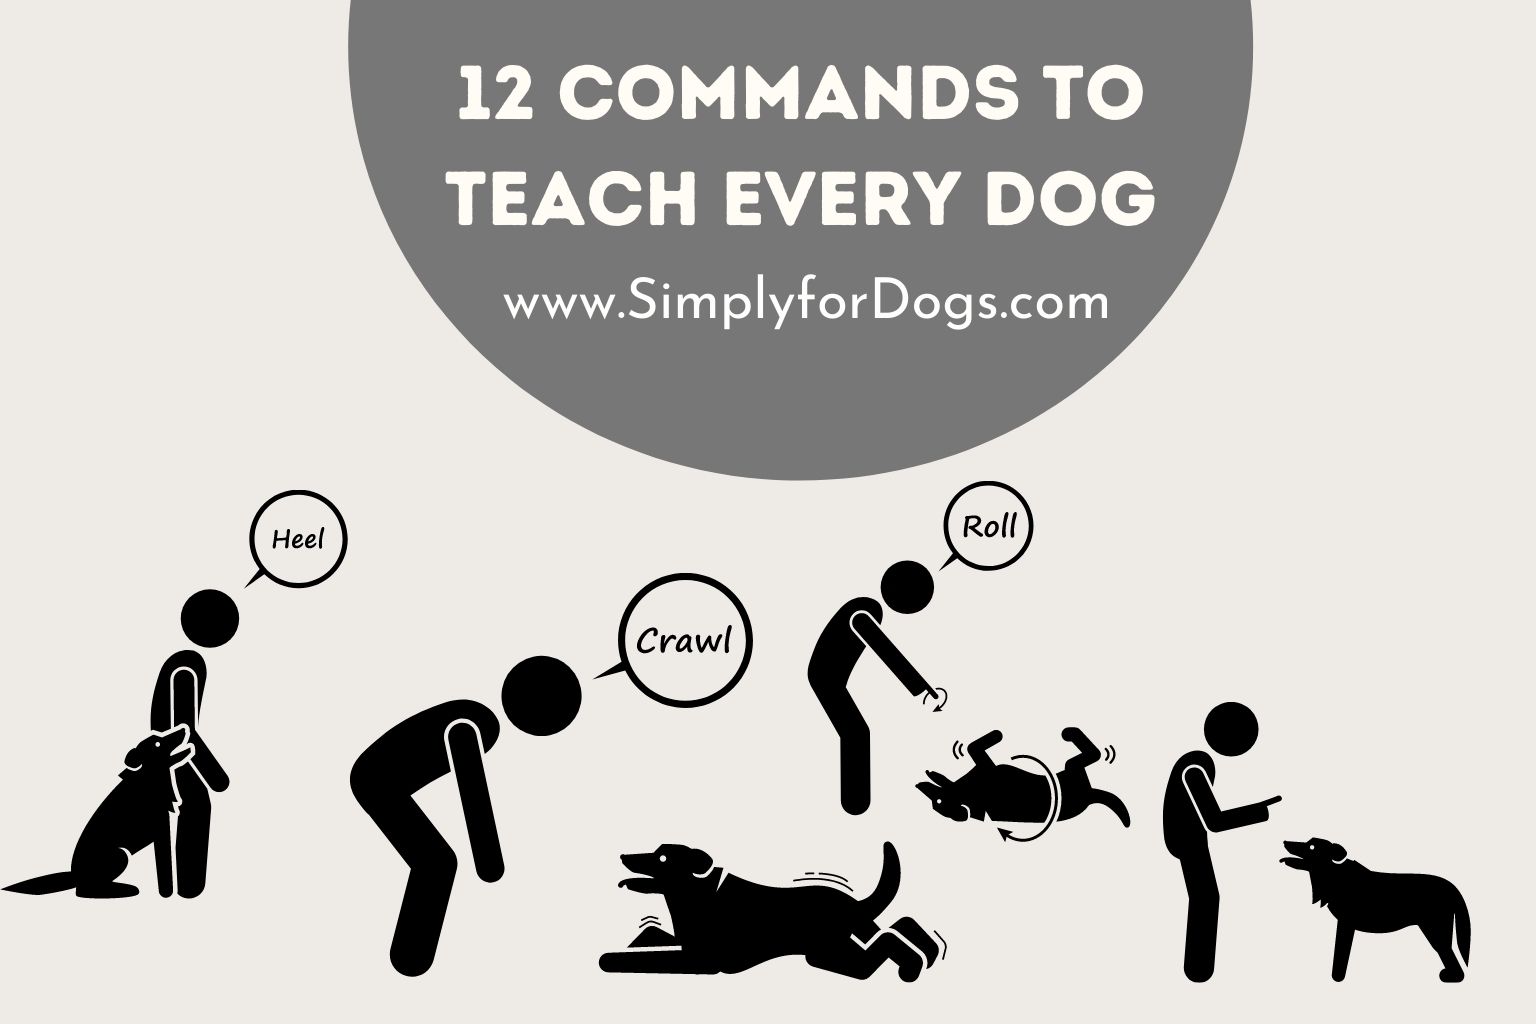 12 Commands to Teach Every Dog